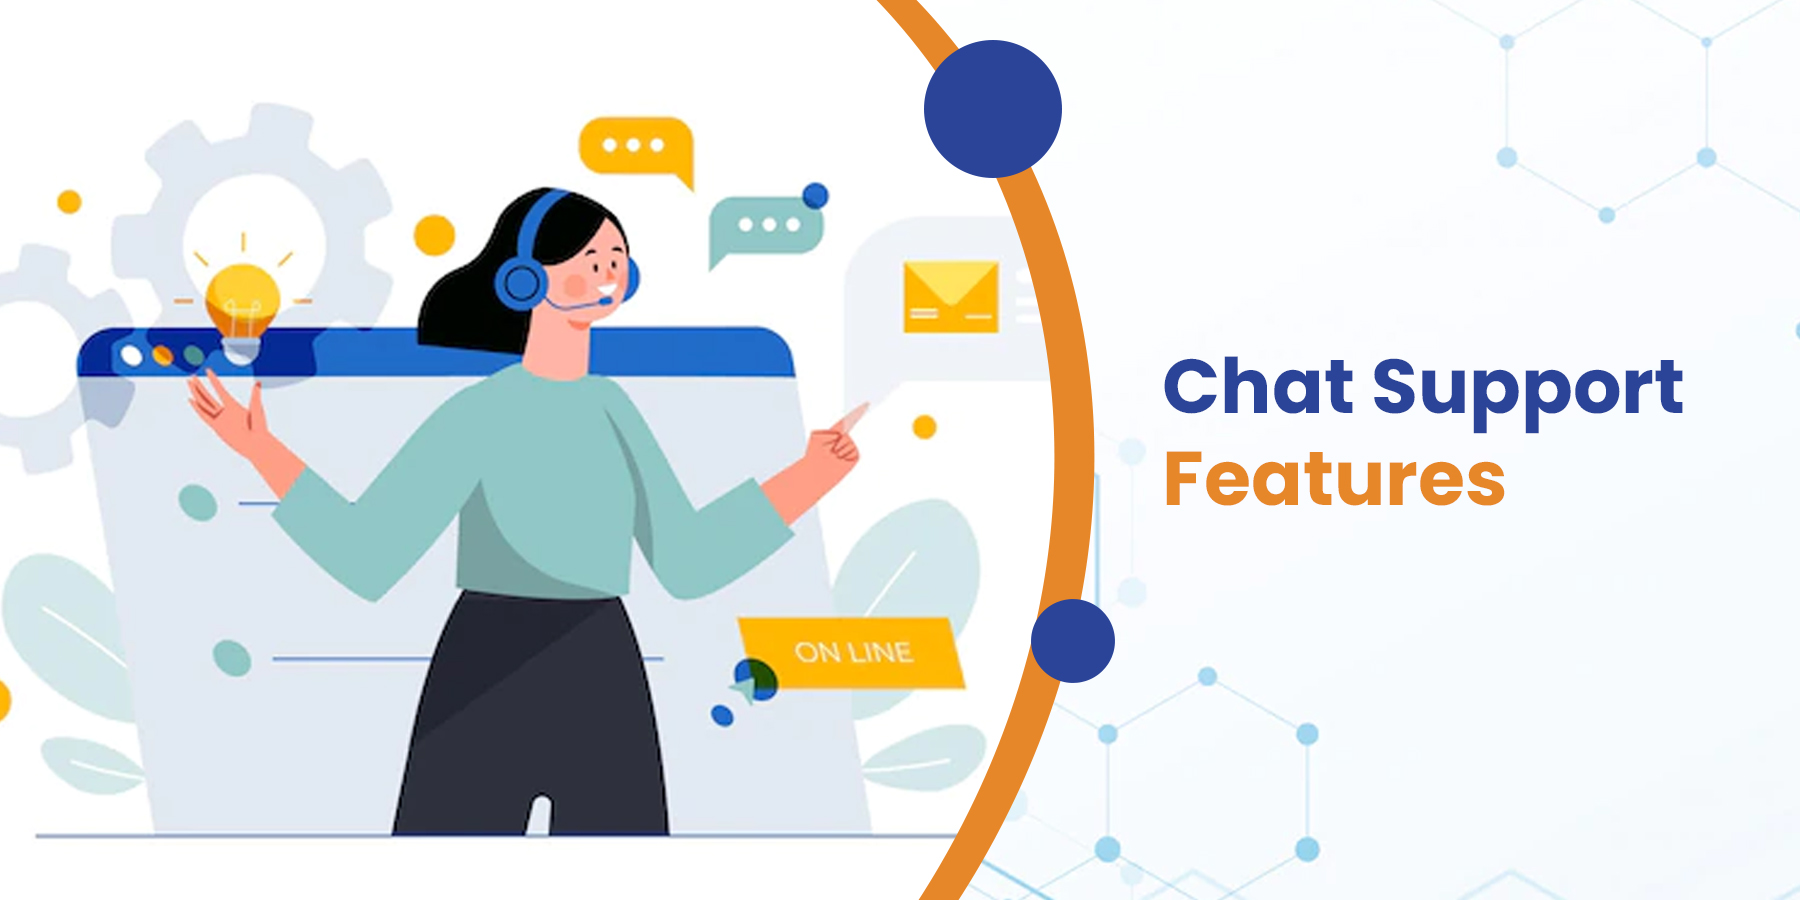 Chat Support Features